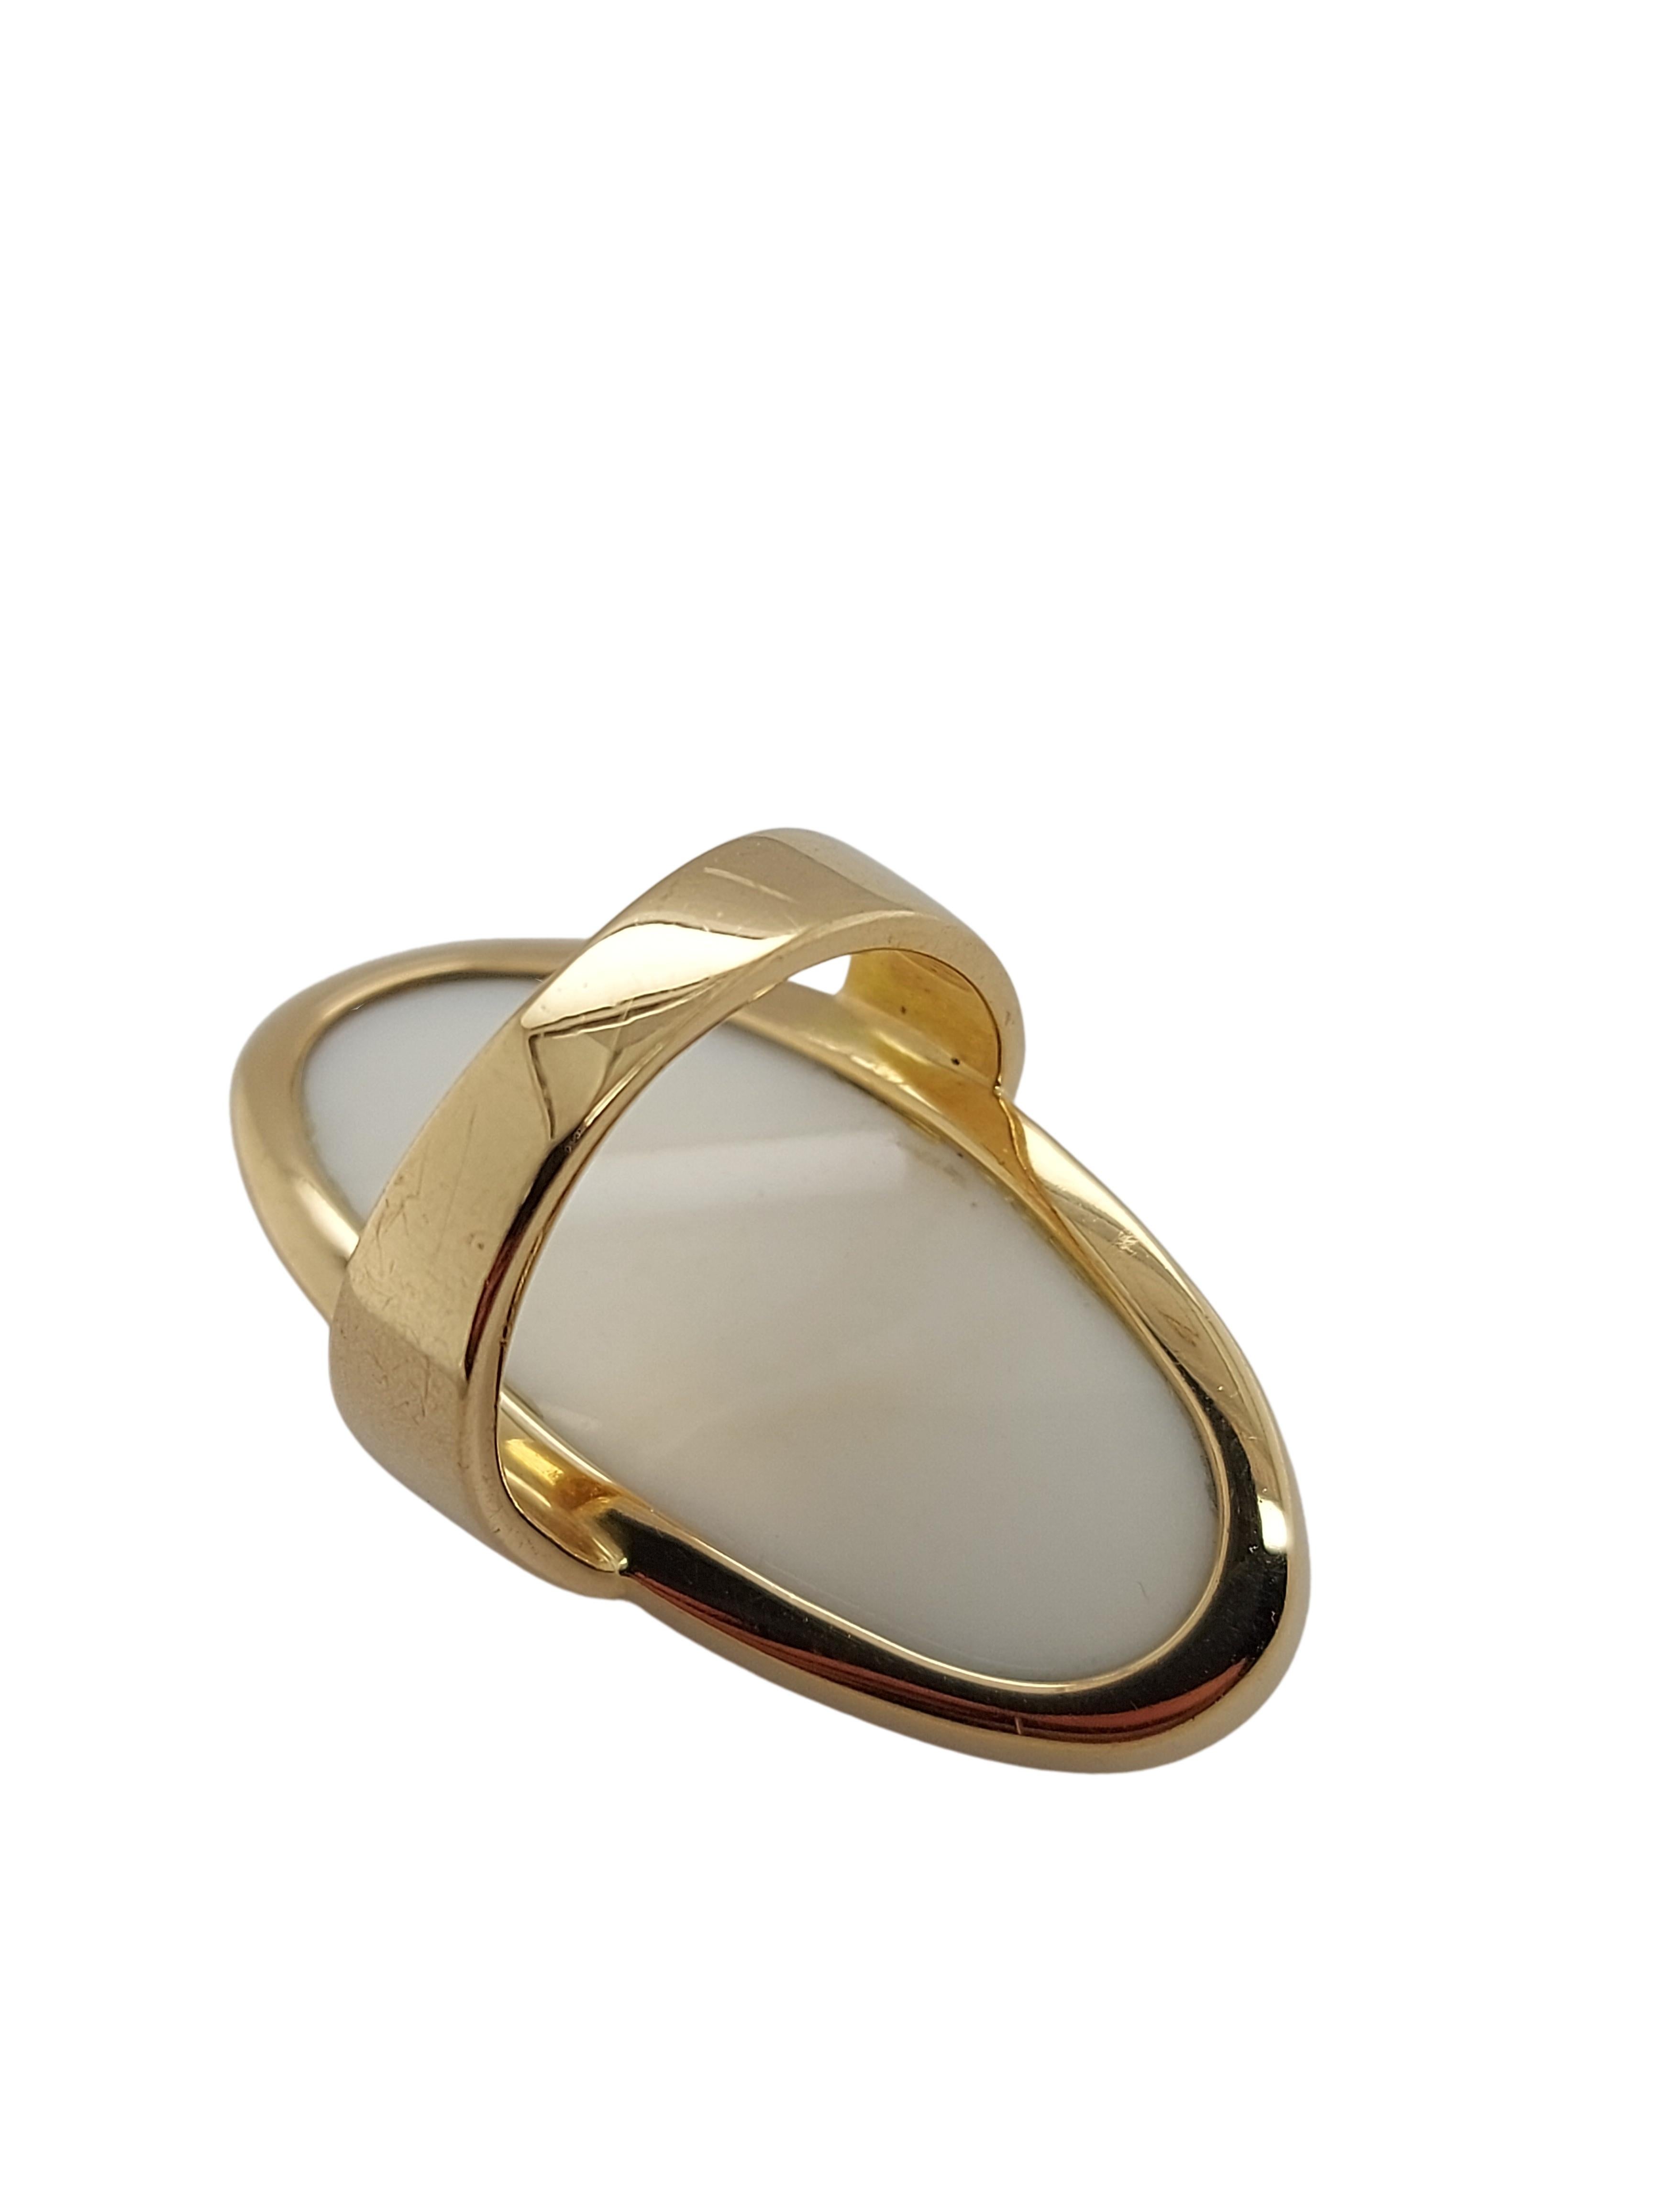 Magnificent and Rare 18kt Yellow Gold Mattioli Hiroko Ring with Kogolong For Sale 3